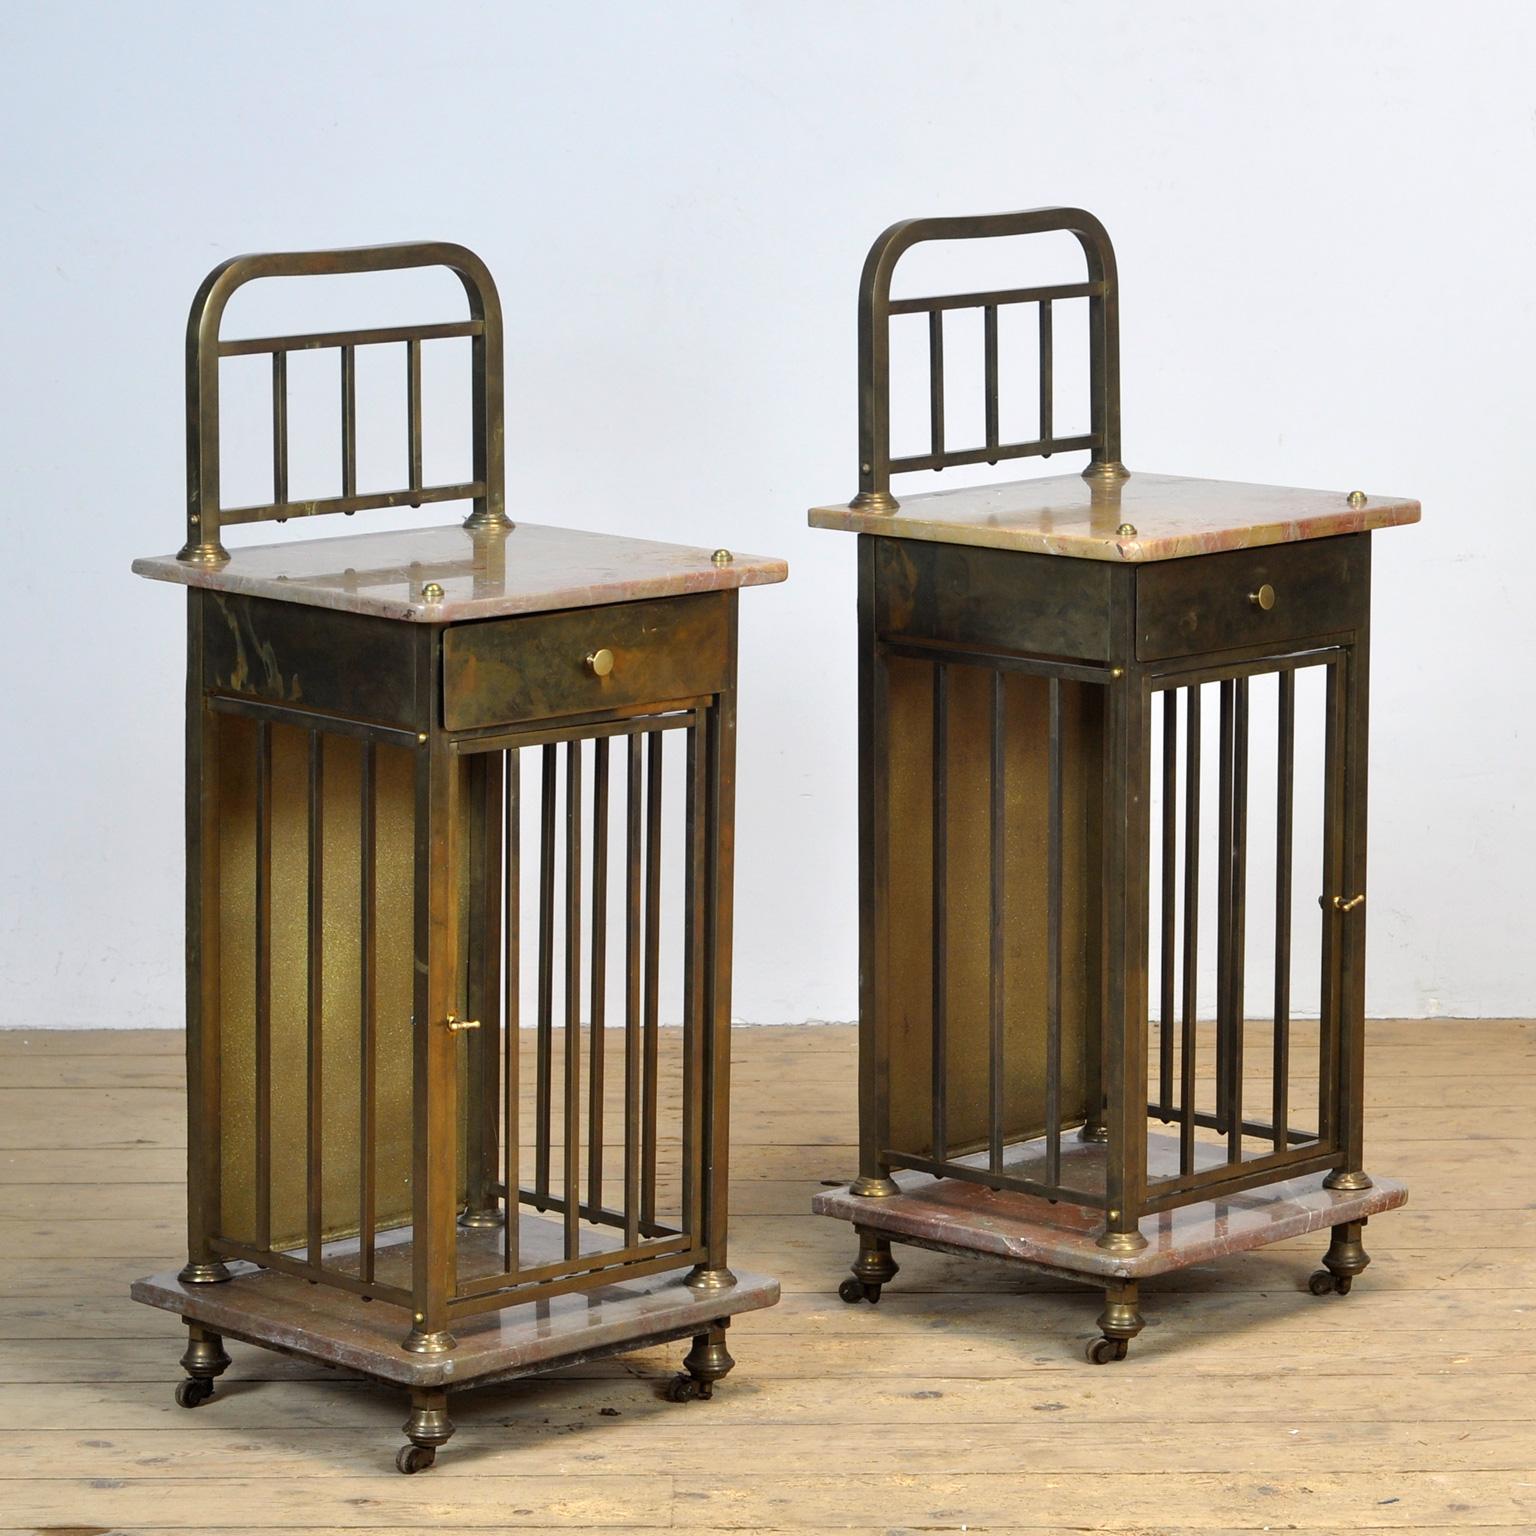 Set of bedside tables produced around 1880. The cabinets have a drawer with space underneath for books, etc. The set is made of brass with marble tops.
Height of top top: 80 cm